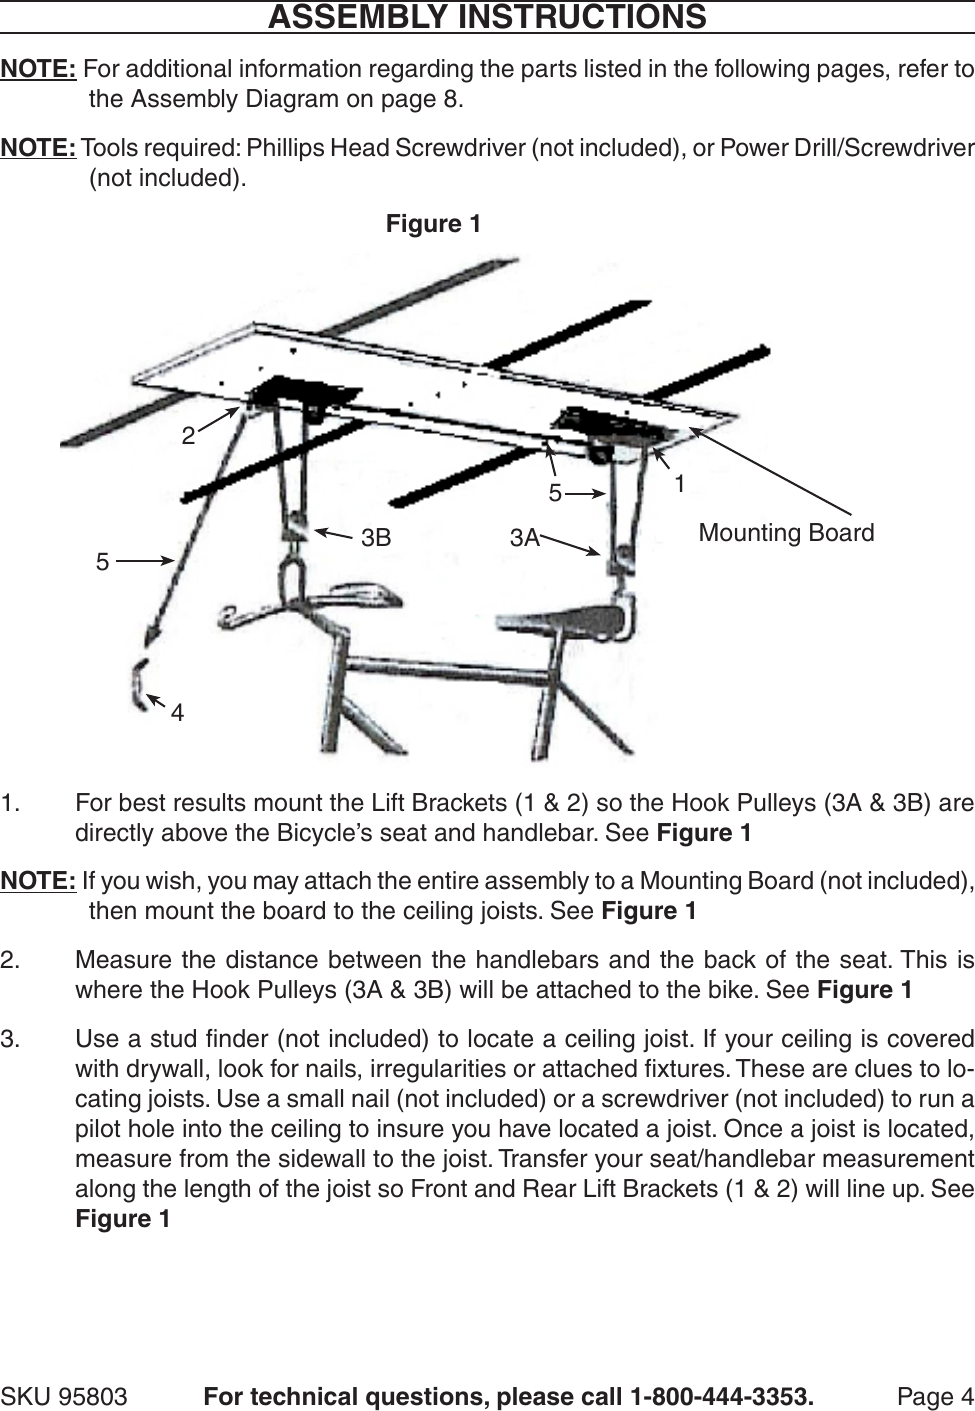 Page 4 of 8 - Harbor-Freight Harbor-Freight-Bicycle-Lift-Product-Manual-  Harbor-freight-bicycle-lift-product-manual